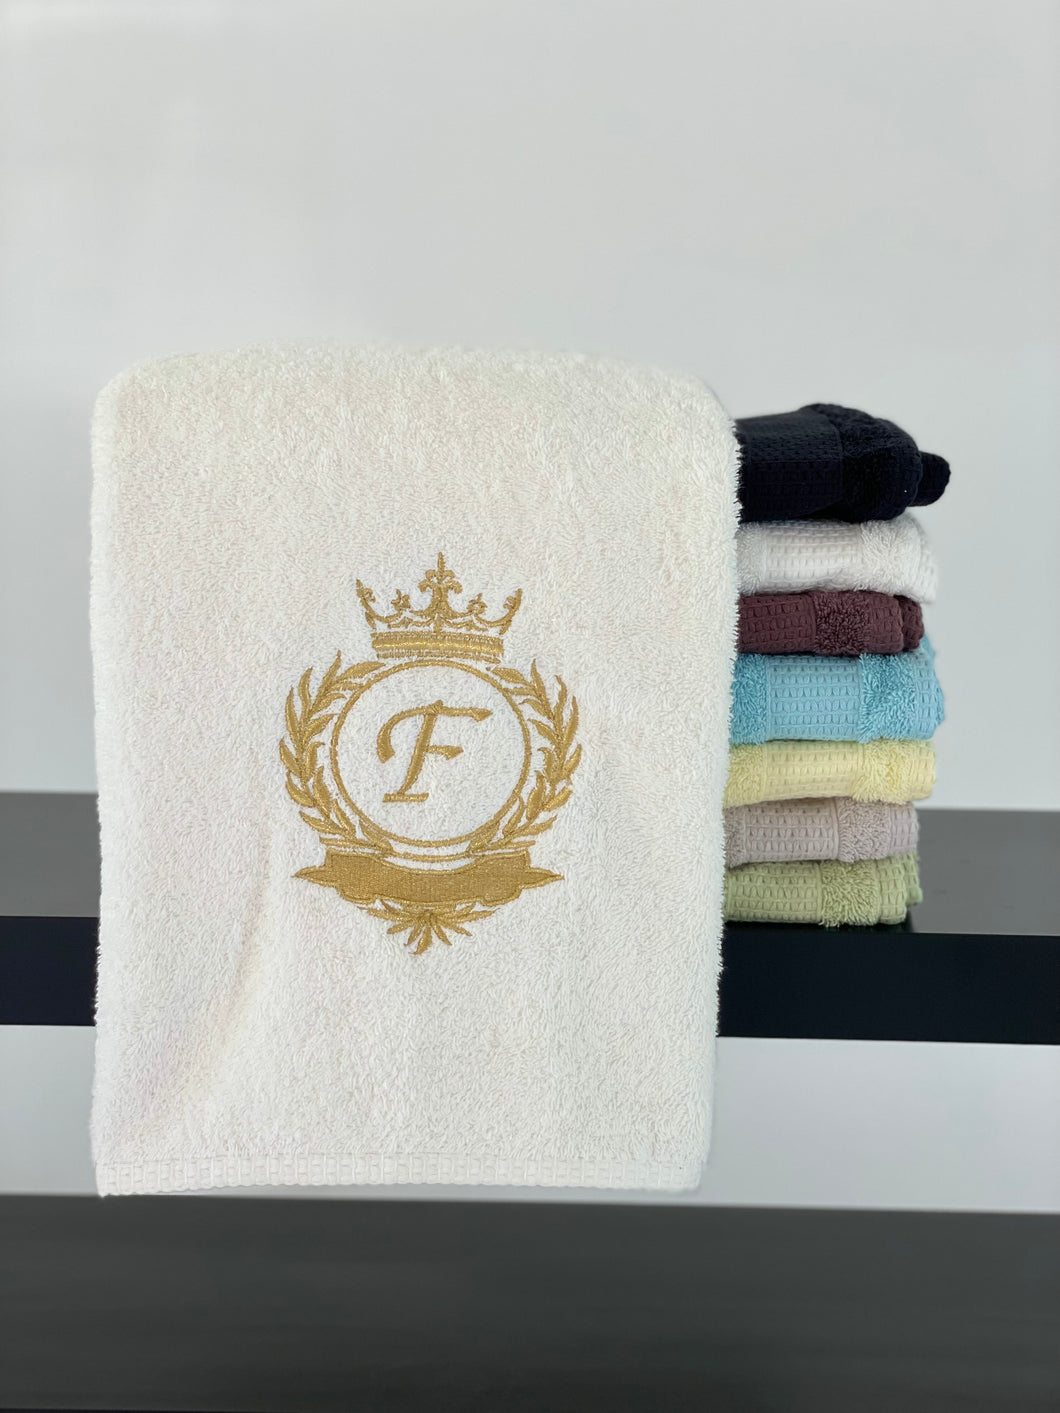 White Bath towel set with initials / Gold metallic antique thread / Monogrammed Towels / Embroidered initials